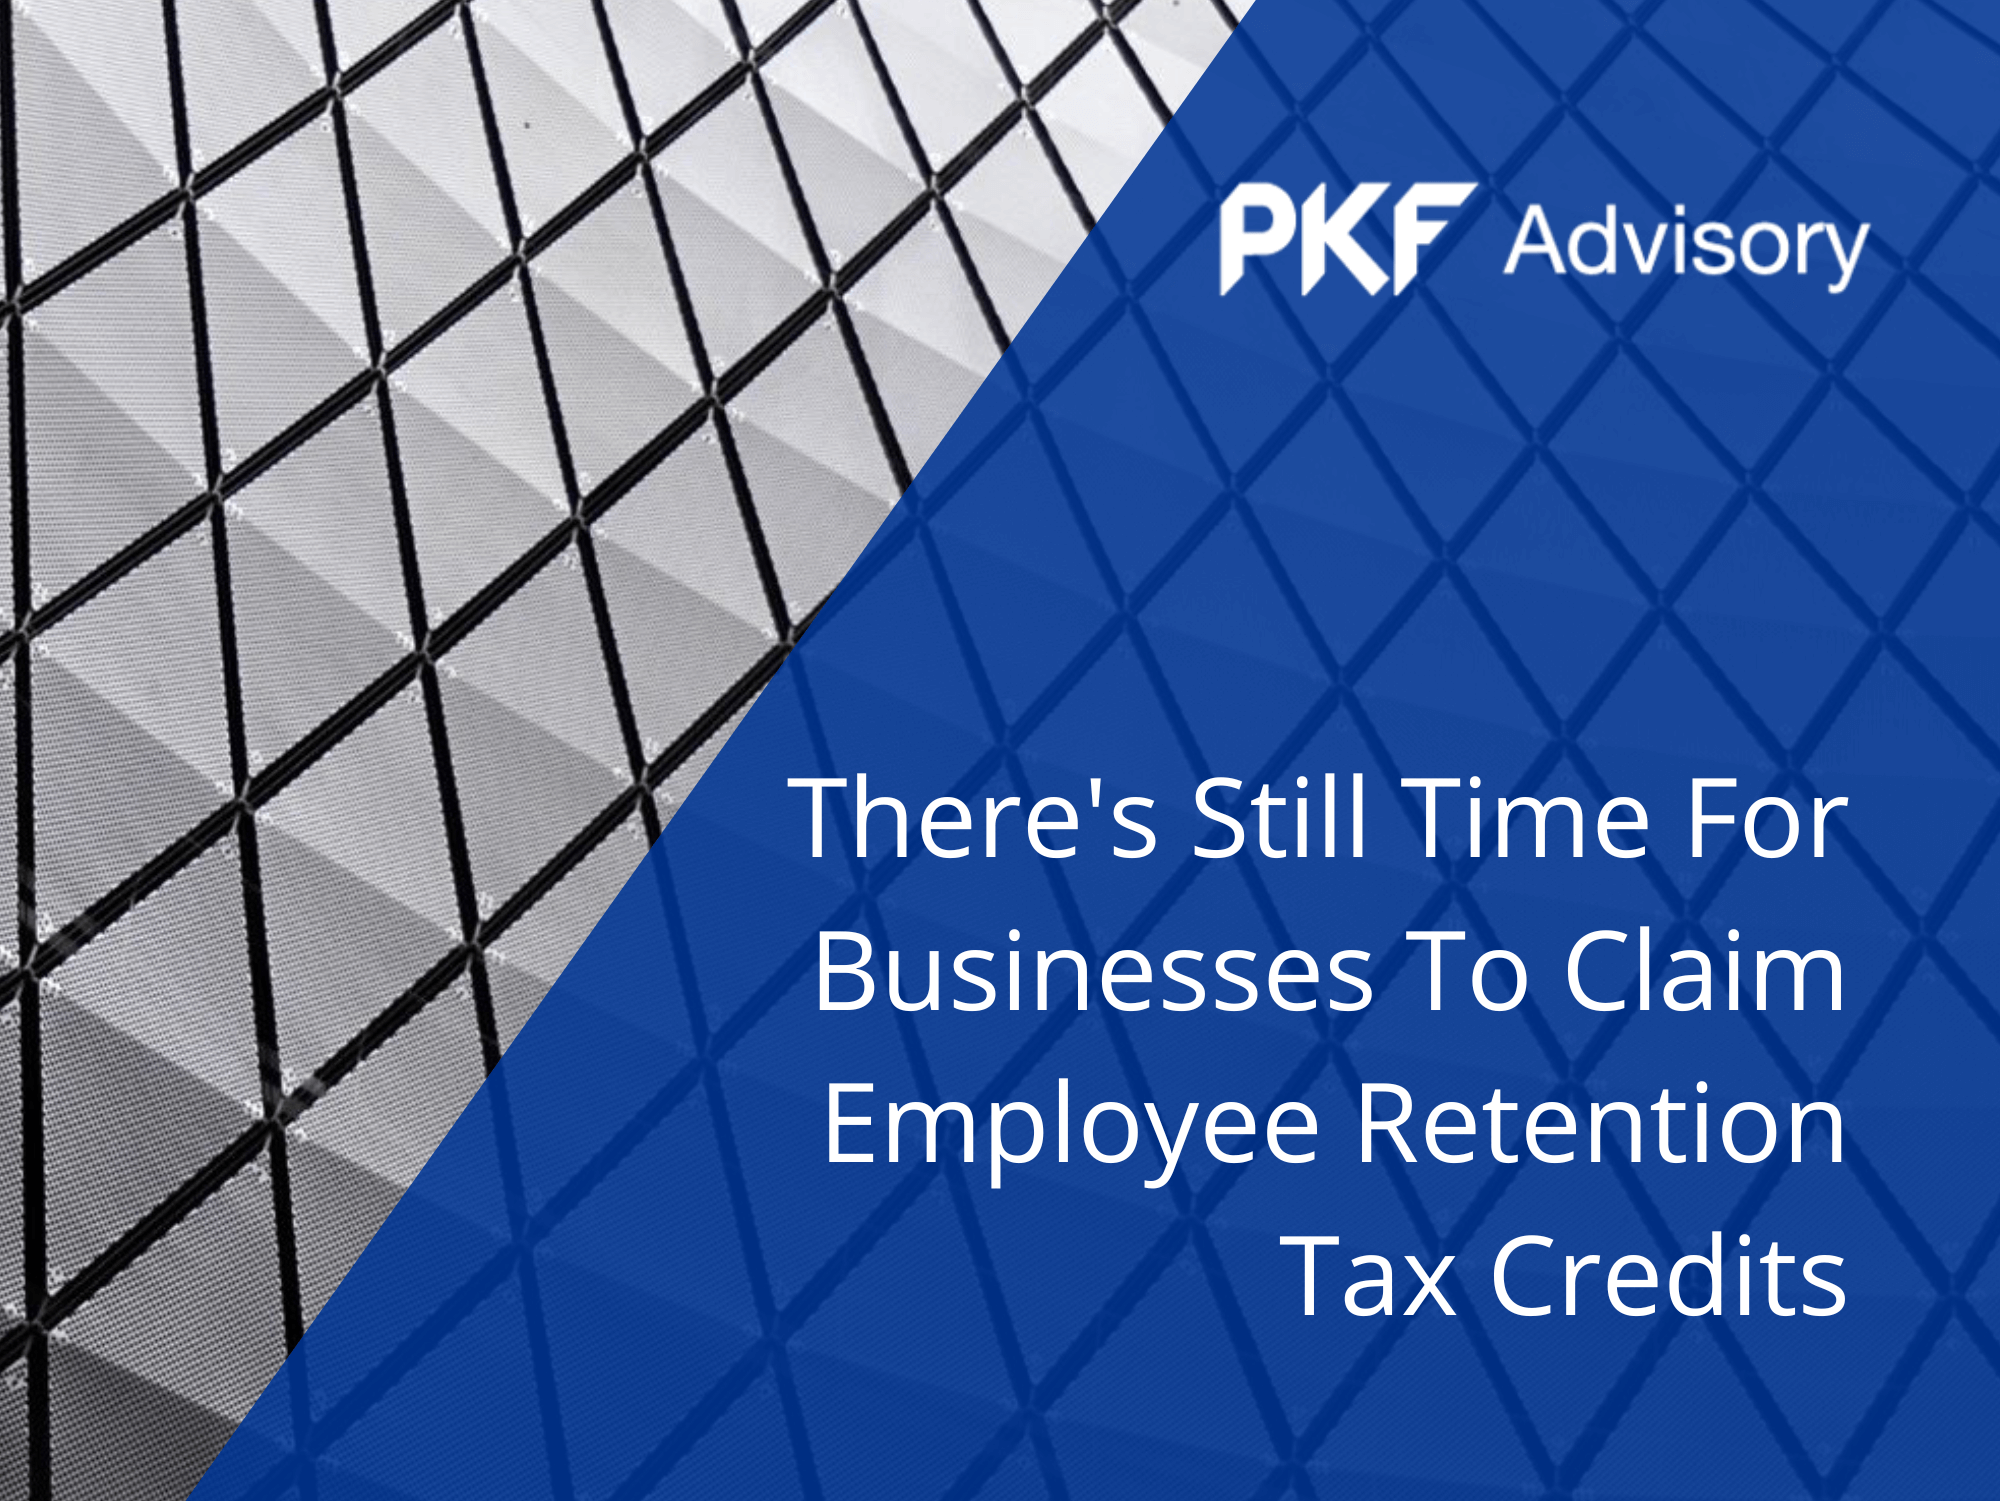 There's Still Time For Businesses To Claim Employee Retention Tax Credits